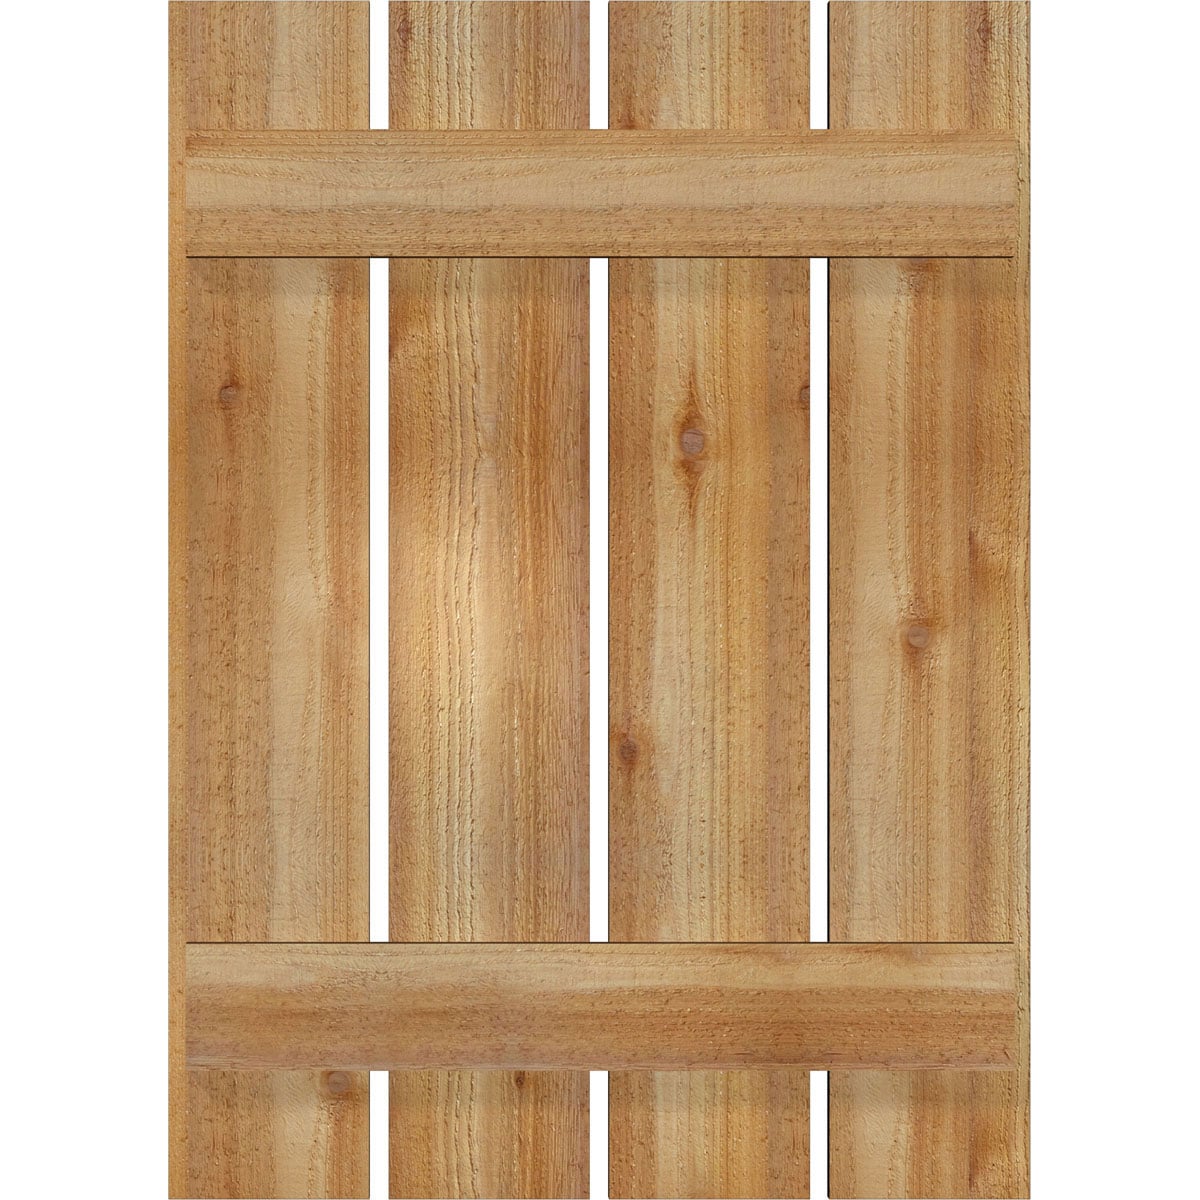 Ekena Millwork 2-Pack 23-in W x 32-in H Unfinished Board and Batten Spaced Wood Western Red cedar Exterior Shutters